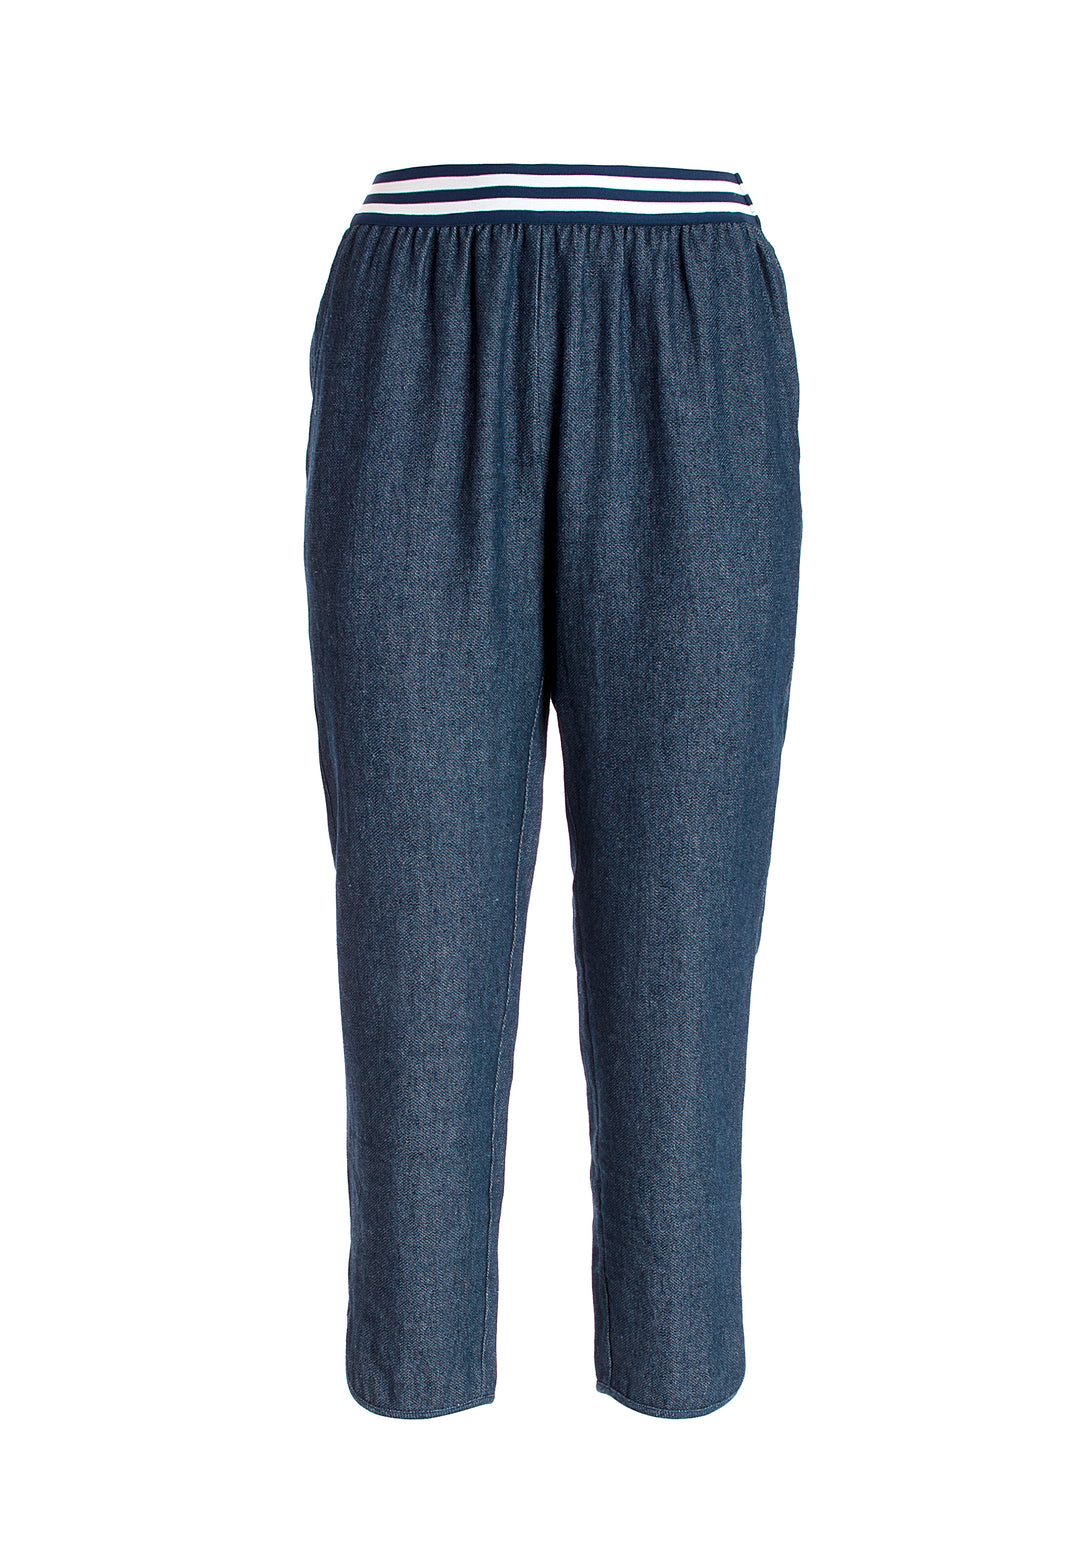 Pant loose fit made in cotton and linen